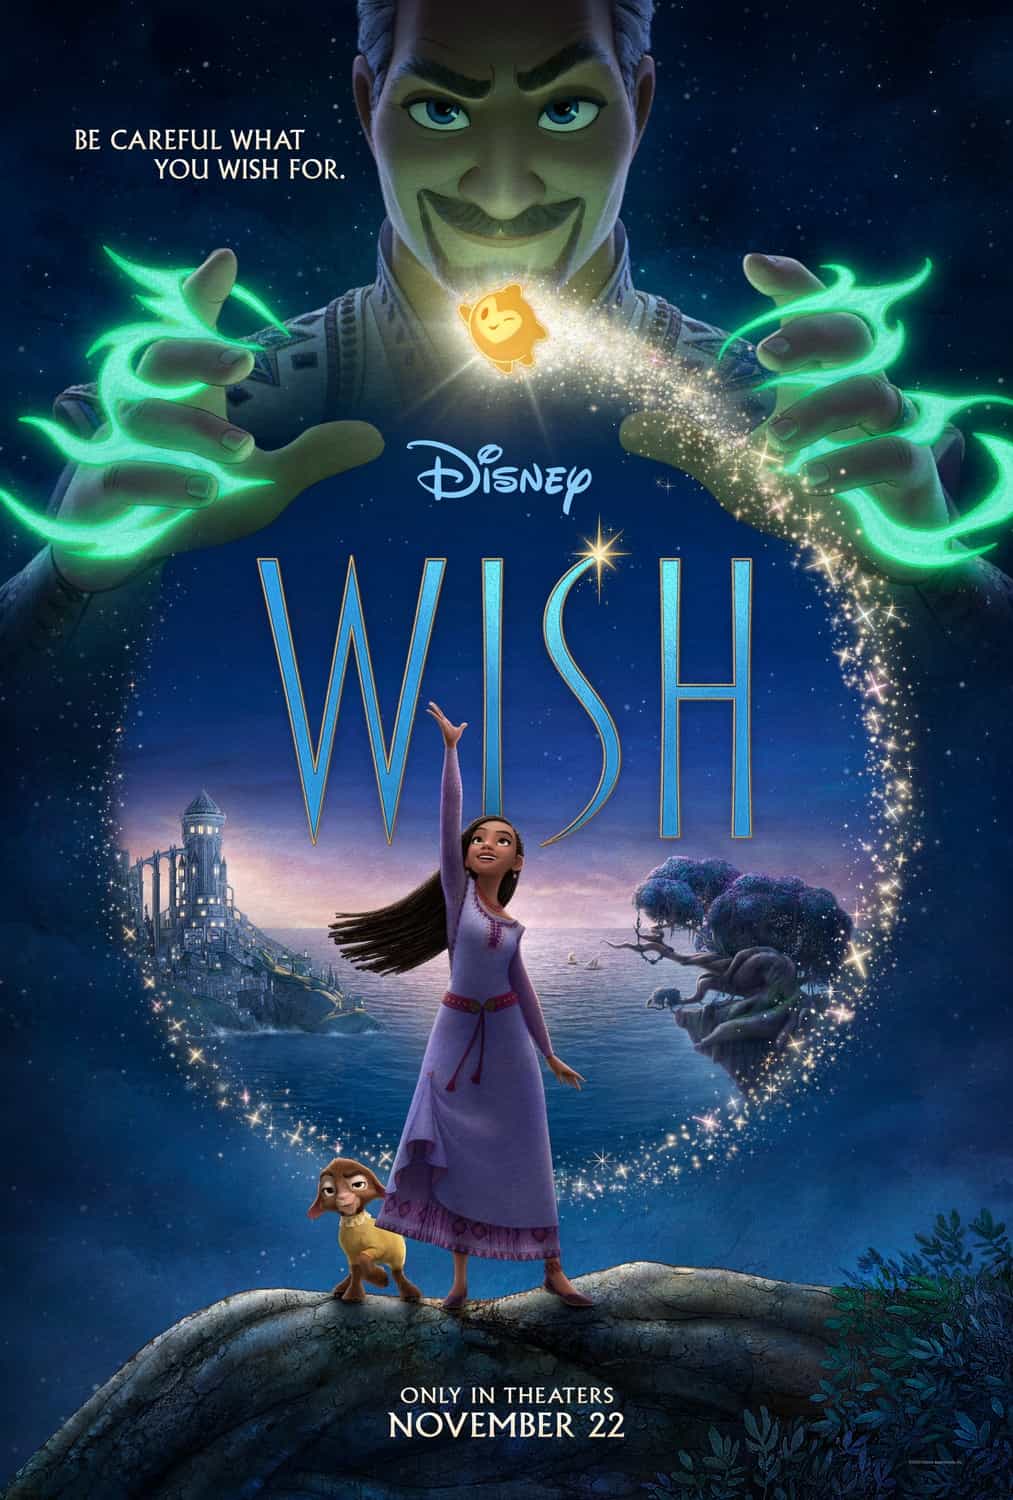 Wish from Disney has been given a U age rating in the UK for mild fantasy threat, very mild rude humour, language